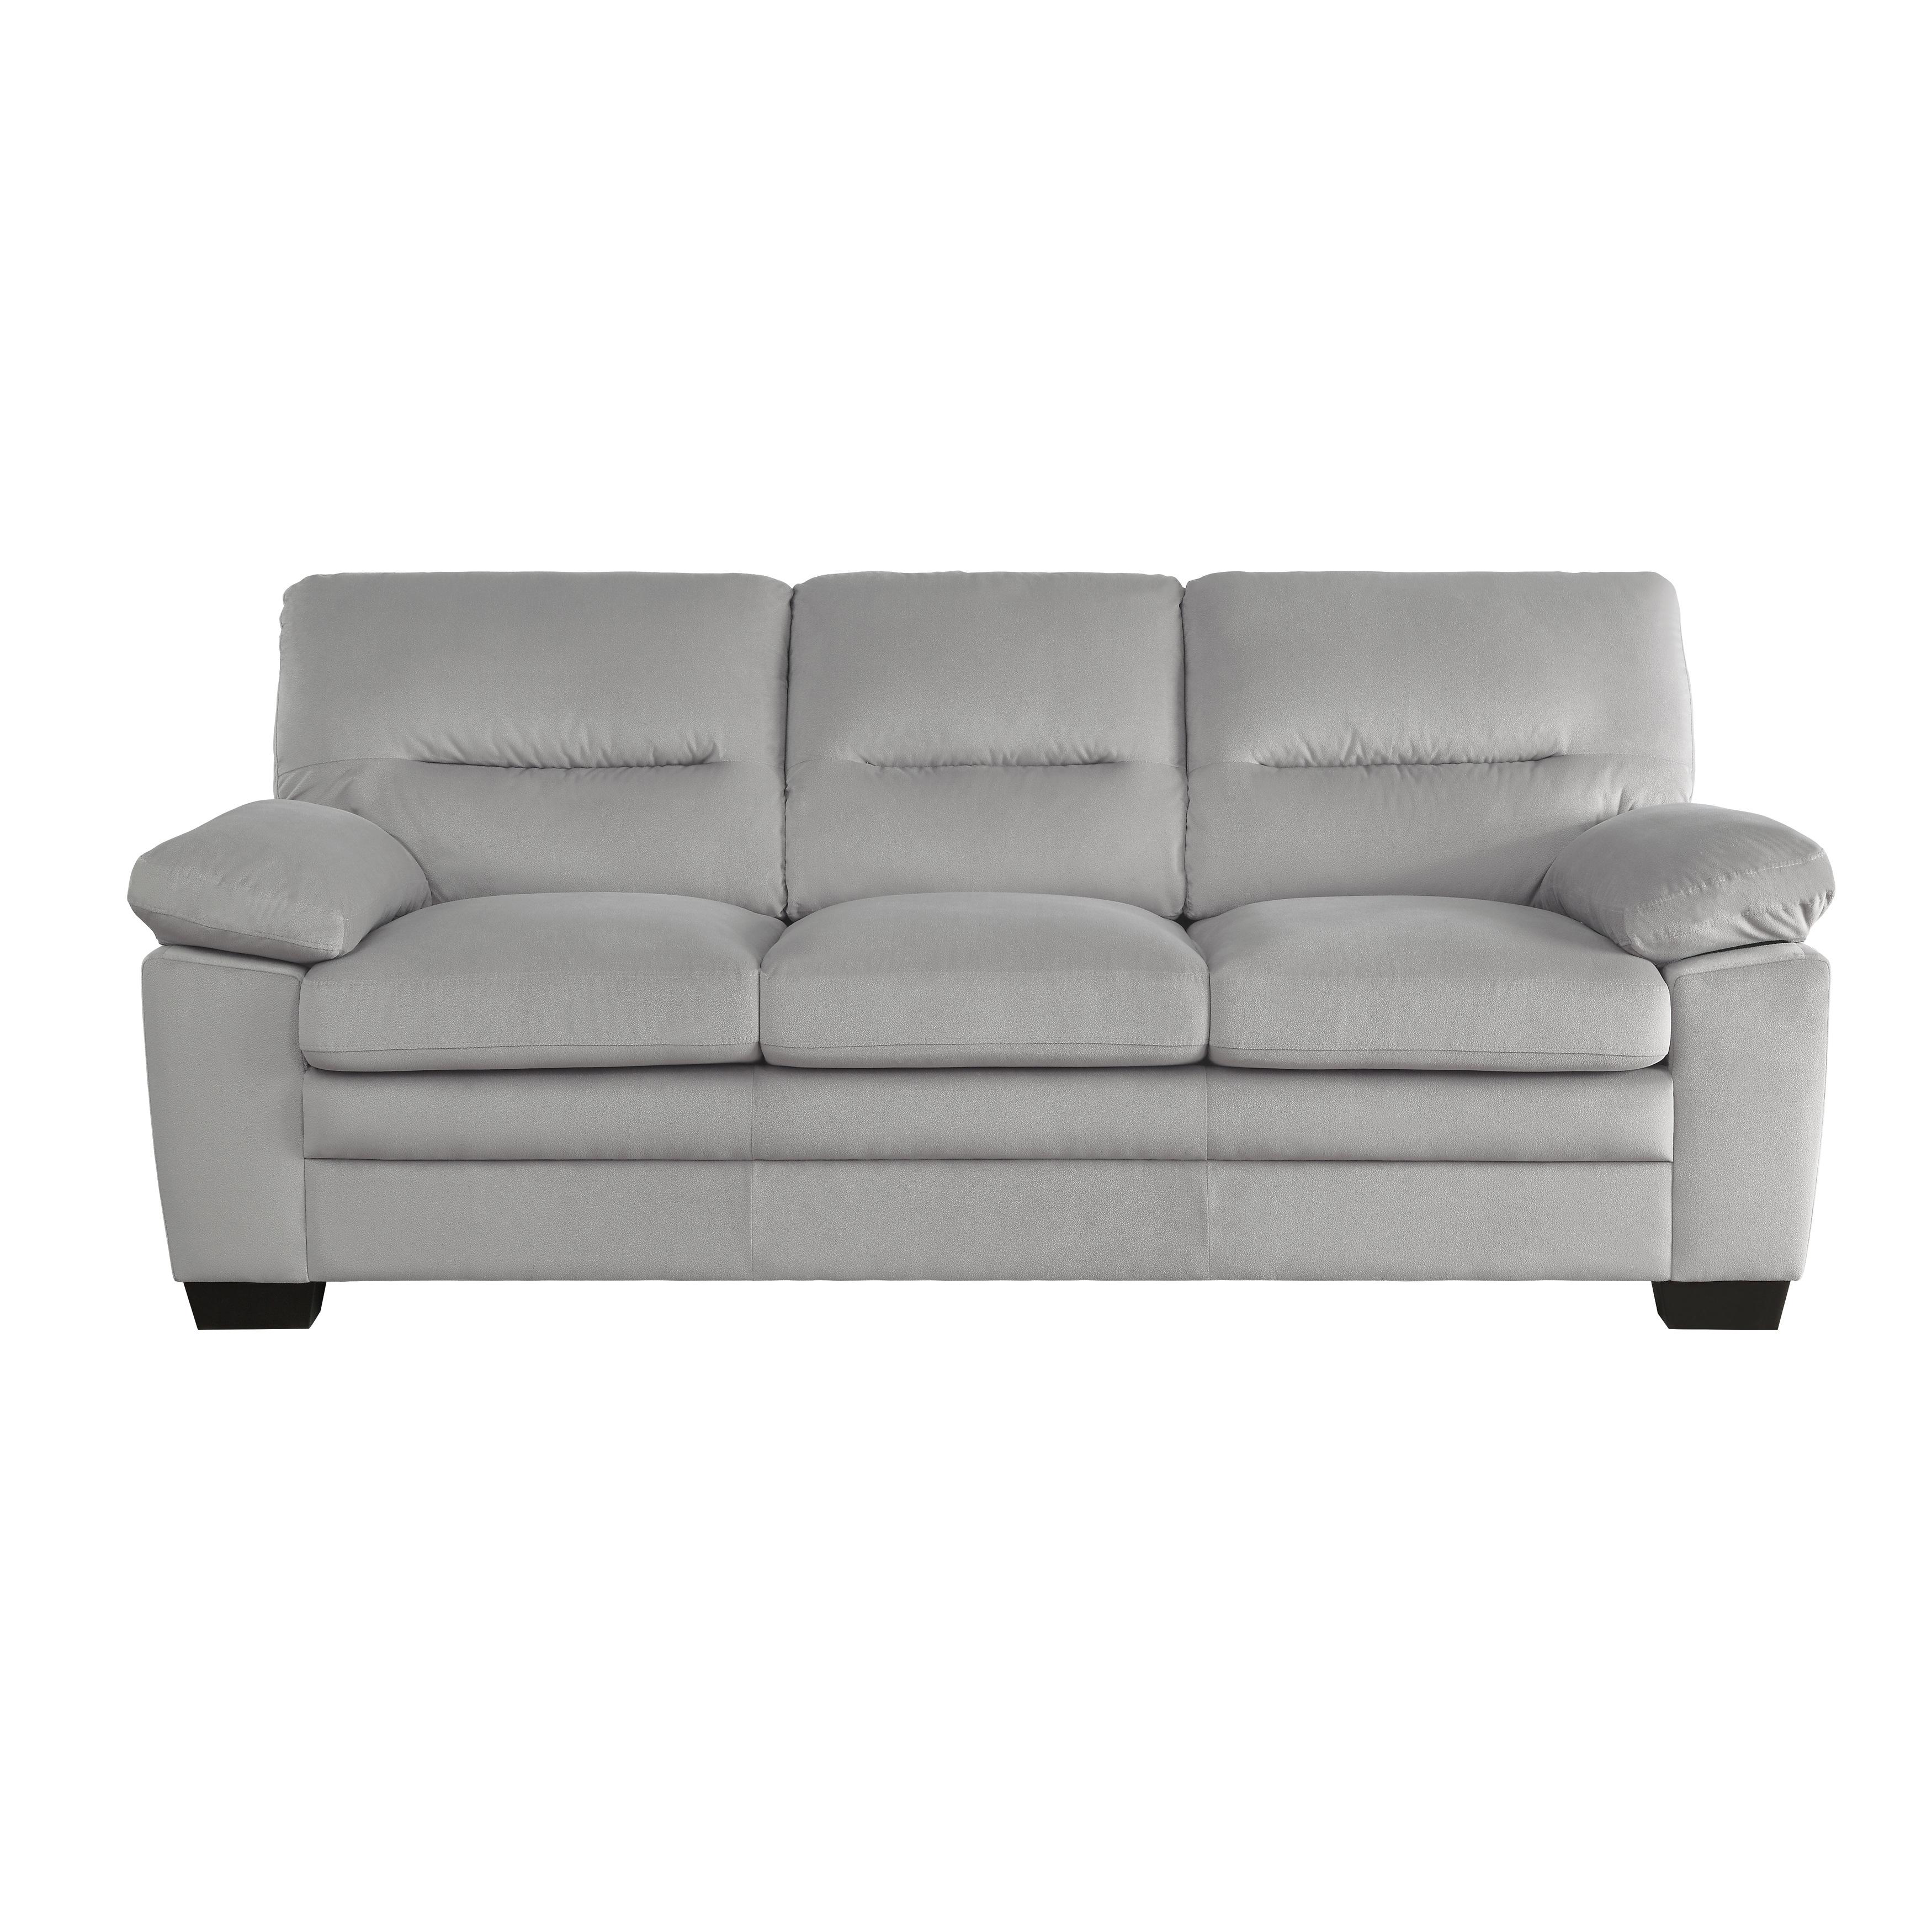 Modern Sofa 9328GY-3 Keighly 9328GY-3 in Gray 